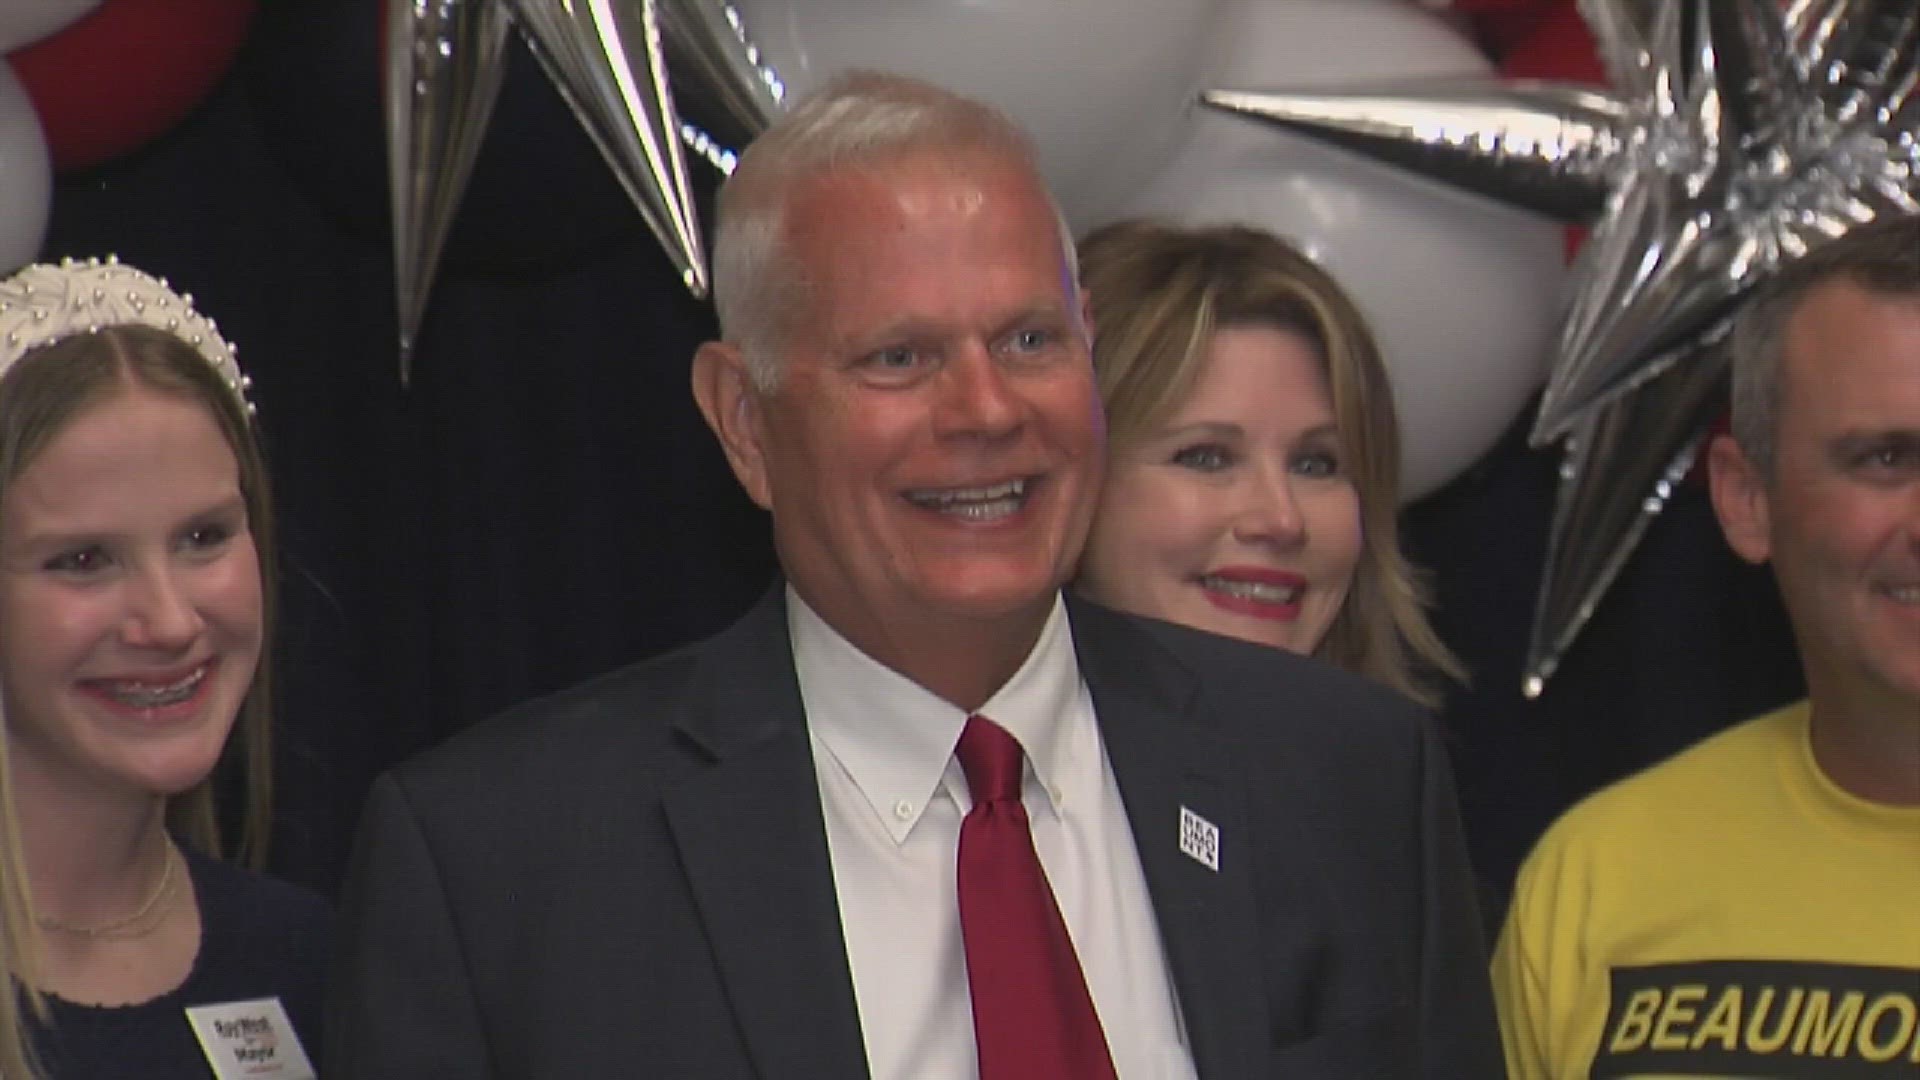 Roy West won the 2023 Beaumont mayoral election, beating incumbent Mayor Mouton and challenger James Eller Jr.